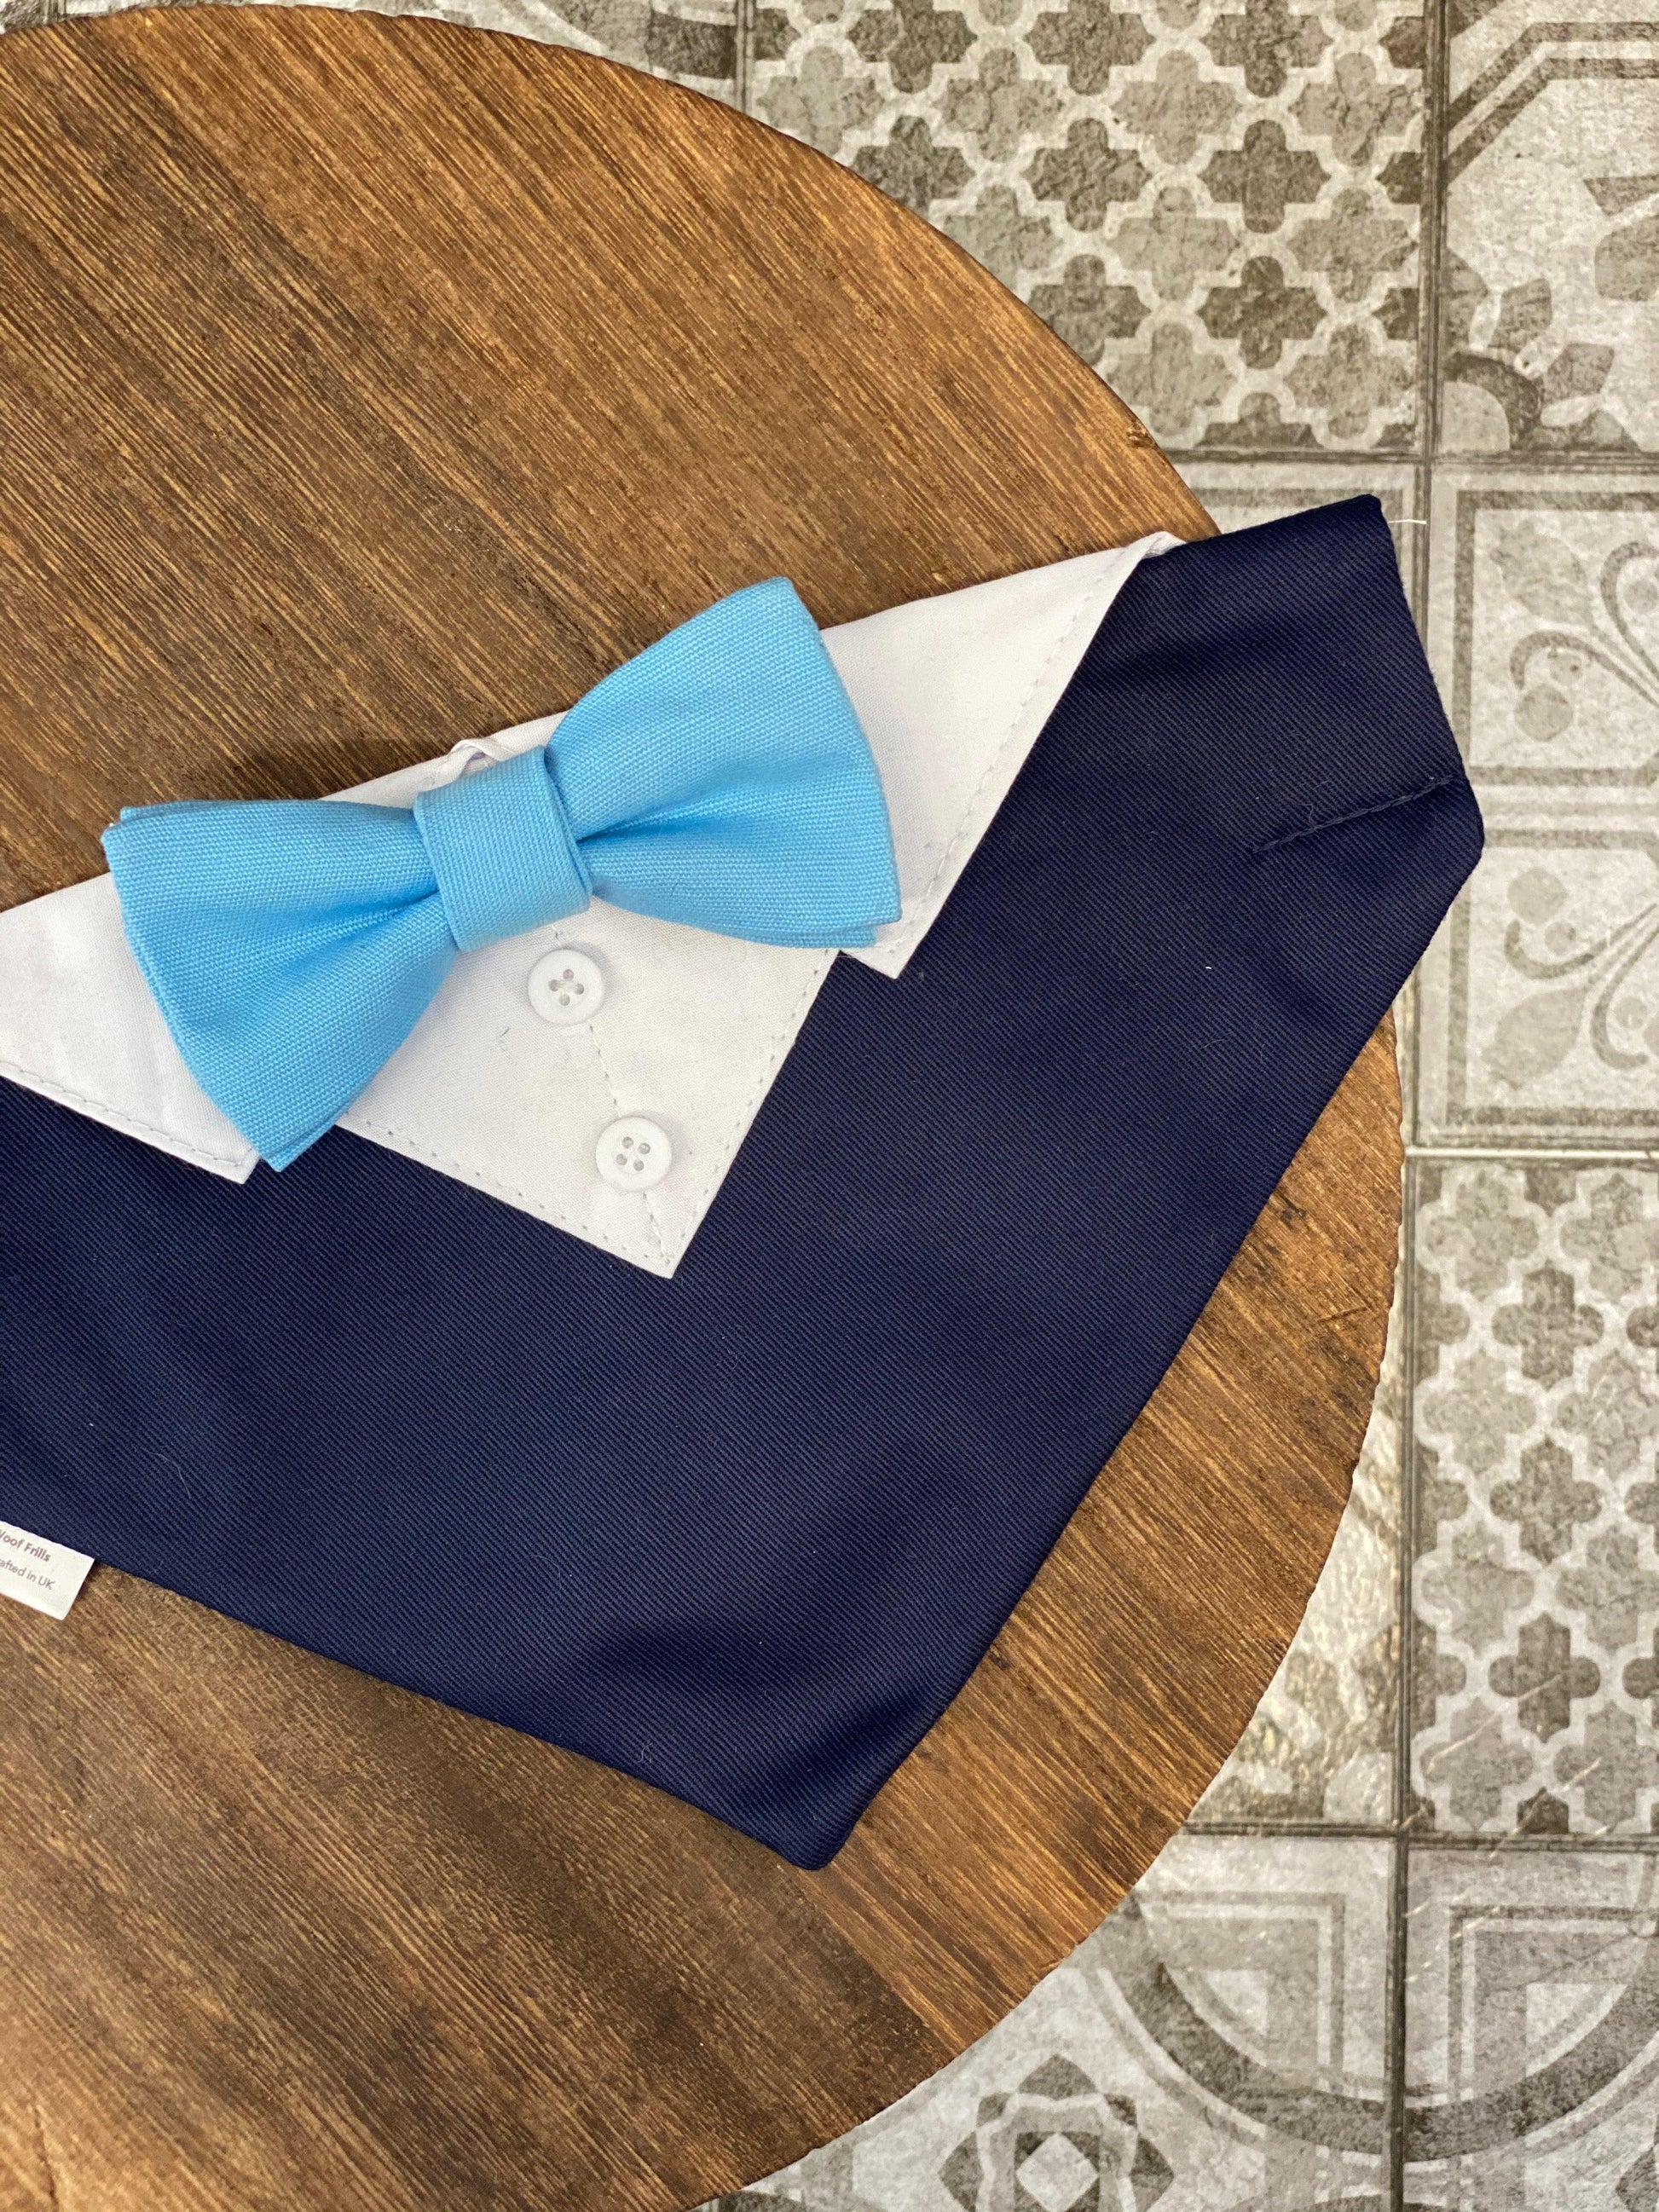 Navy blue wedding outfit for dogs with blue bow tie